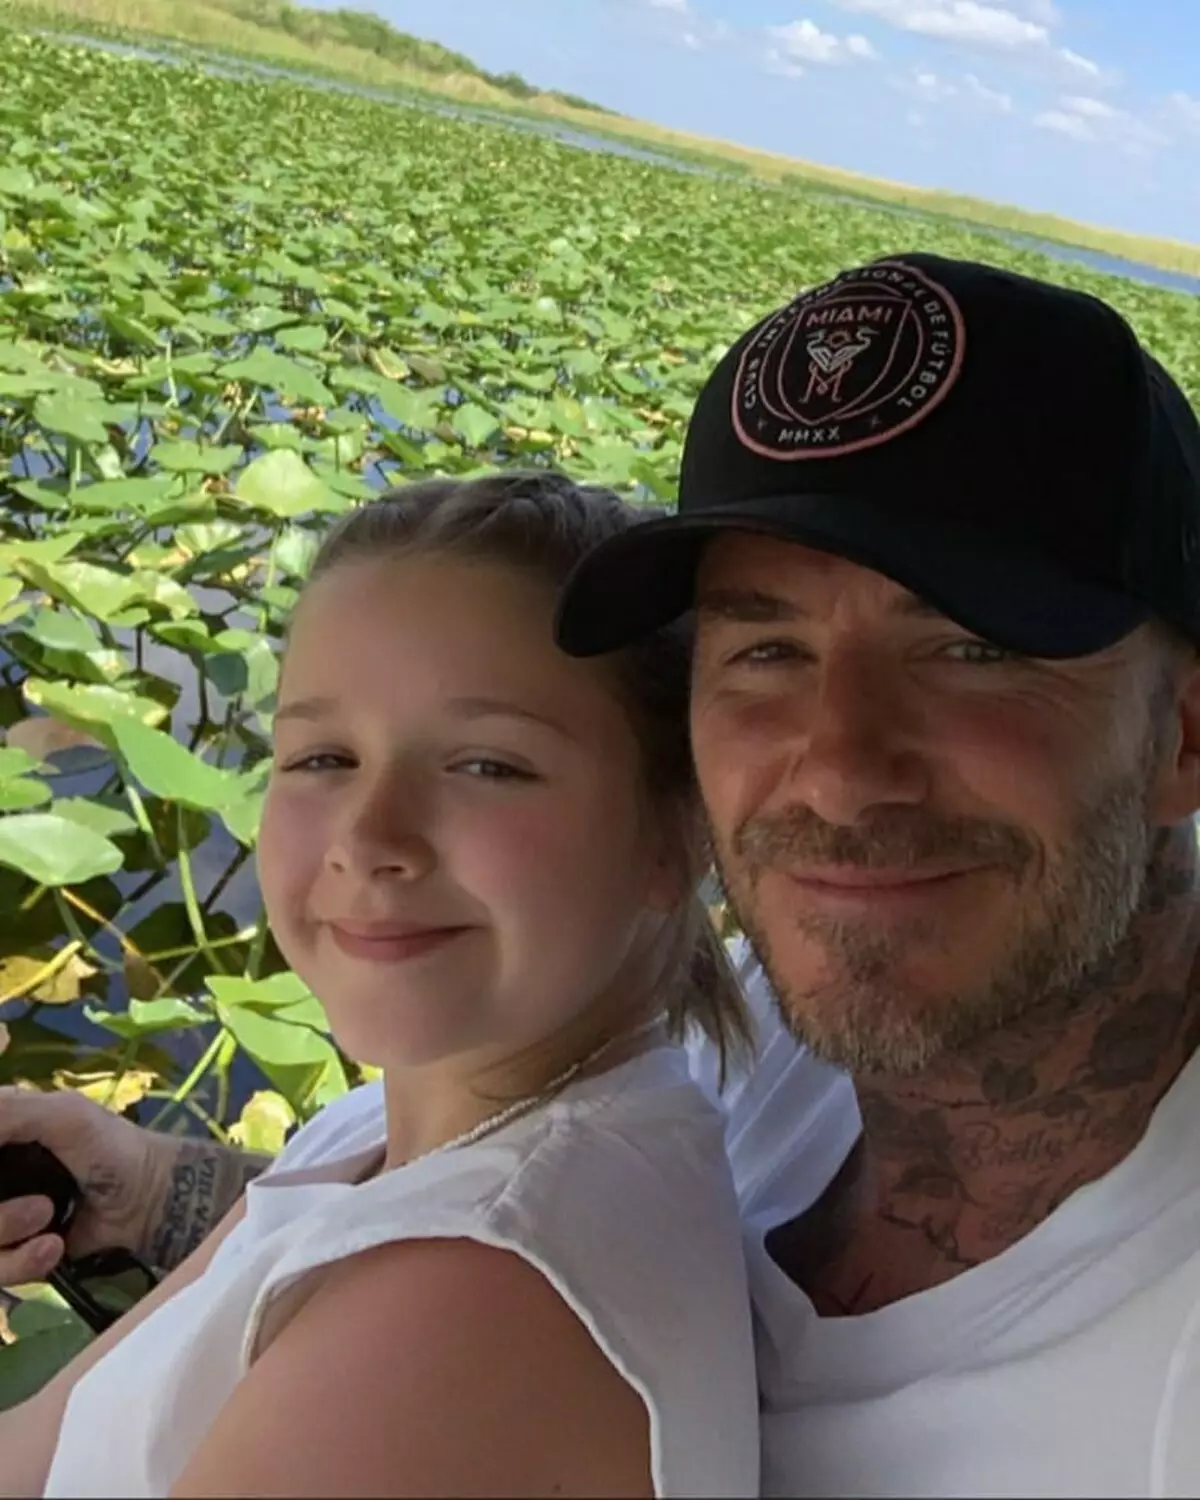 Pier Morgan condemned David Beckham for a kiss with his daughter: 